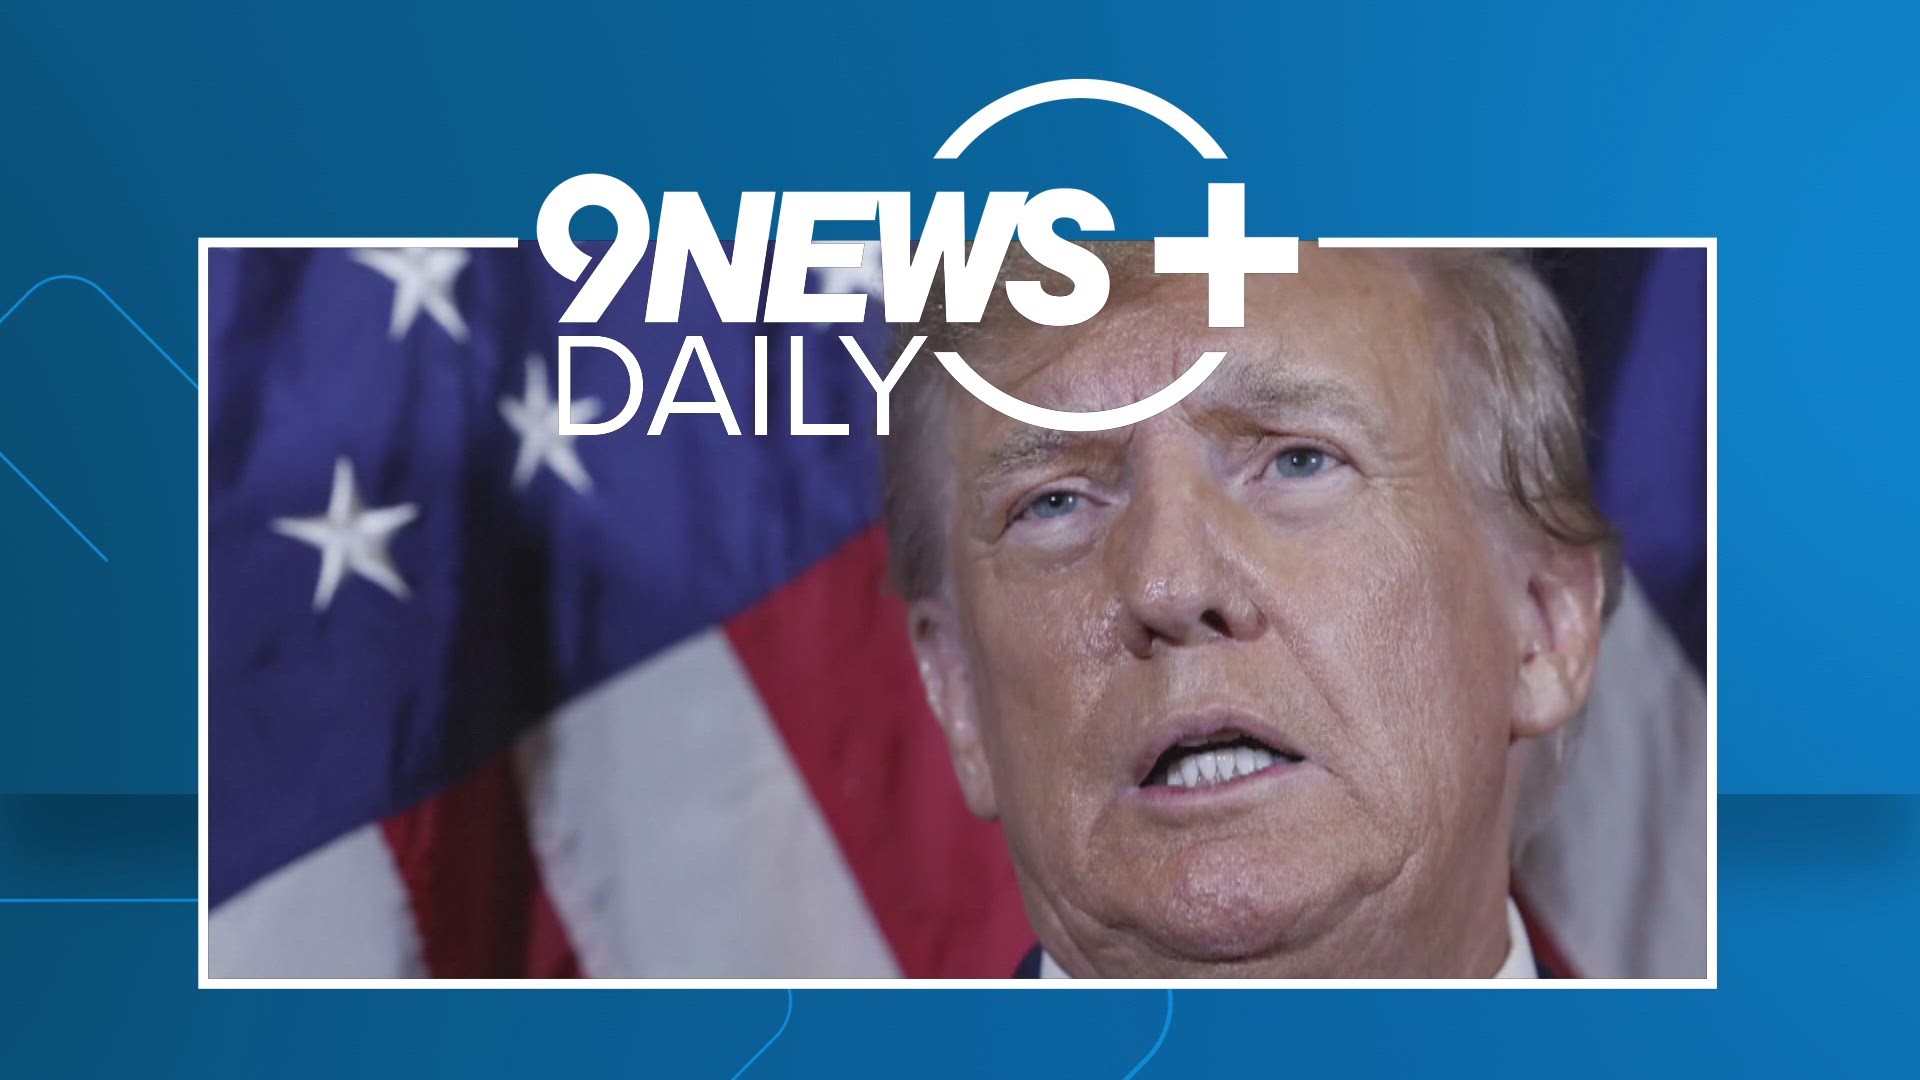 A Manhattan grand jury is investigating hush-money payments made on former President Donald Trump's behalf. 9NEWS legal expert Whitney Taylor discusses the case.